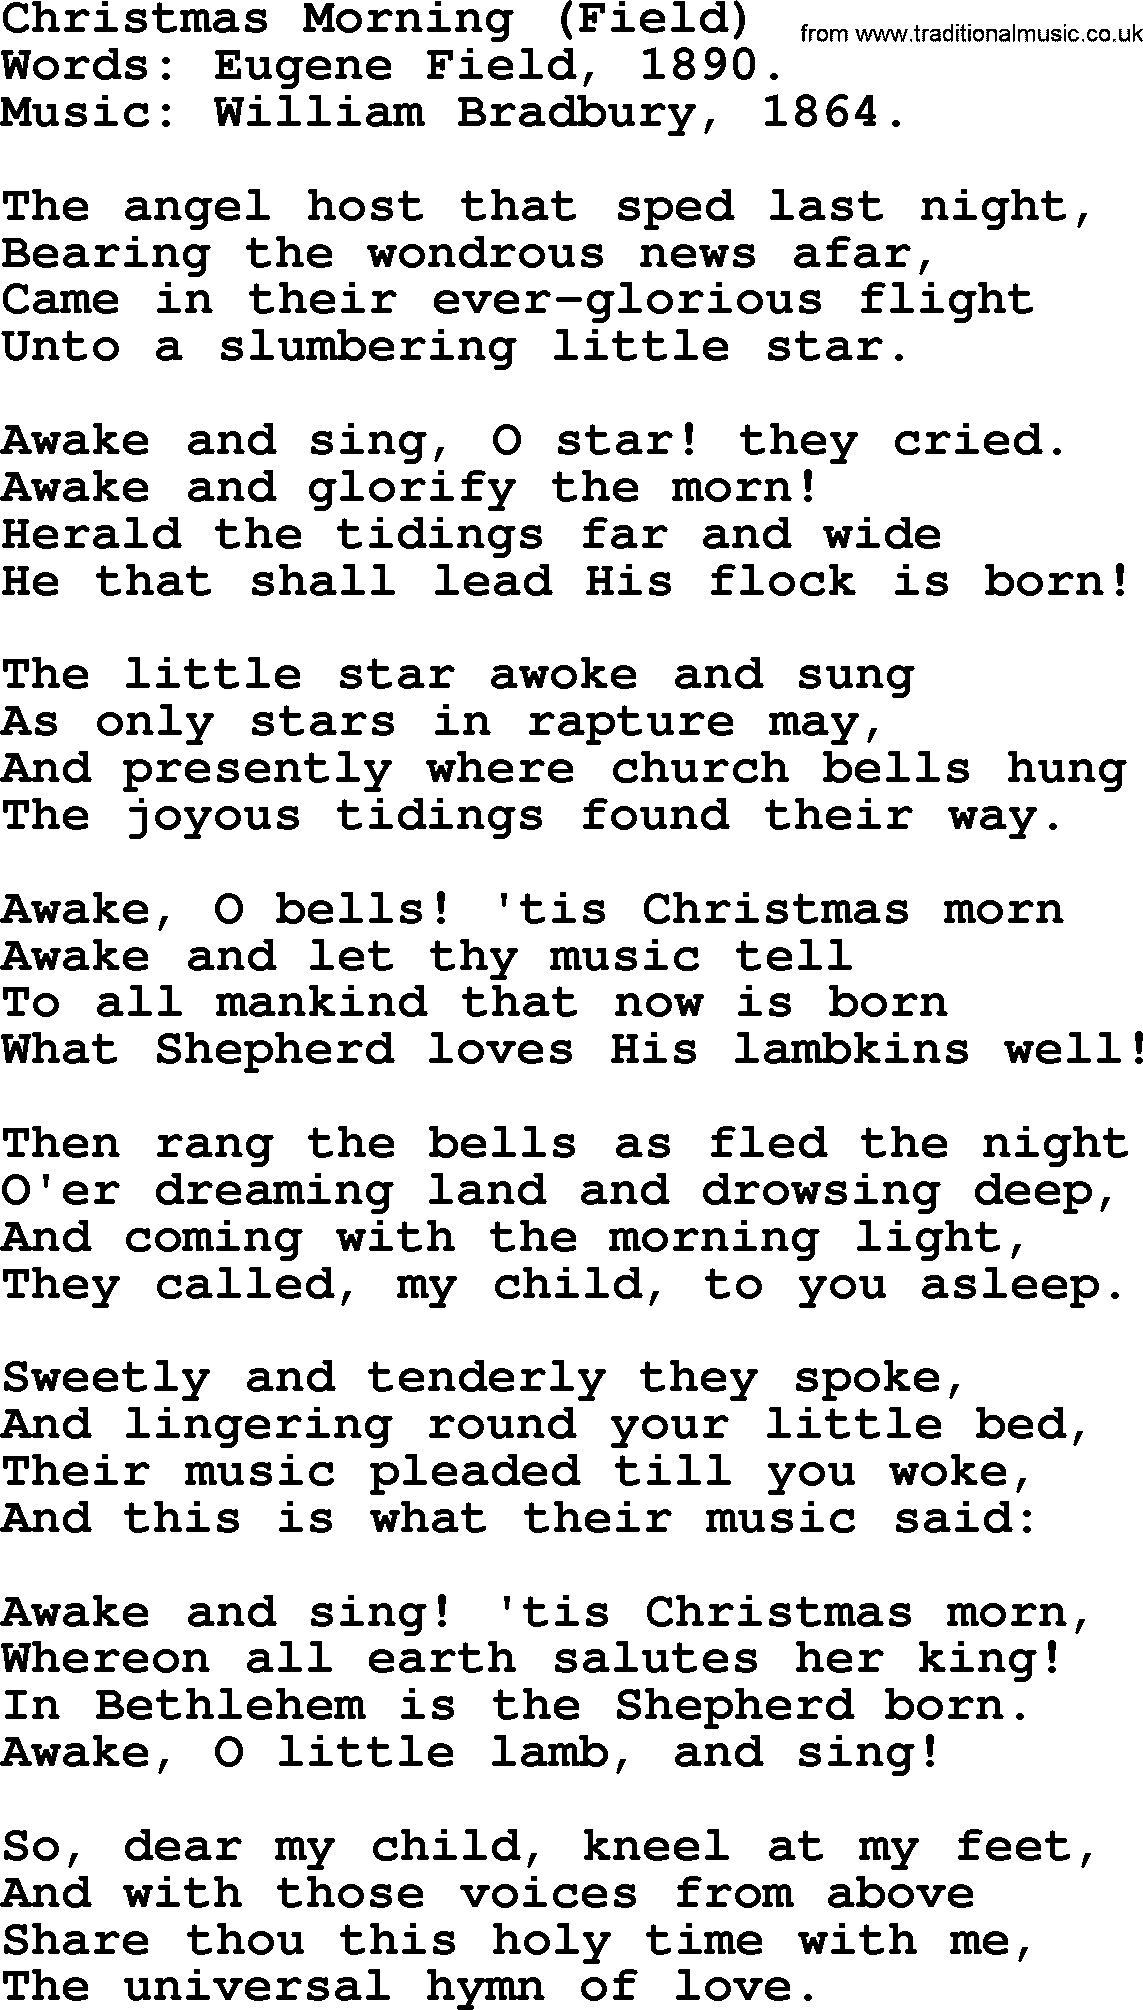 Christmas Hymns, Carols and Songs, title: Christmas Morning (field) - complete lyrics, and PDF